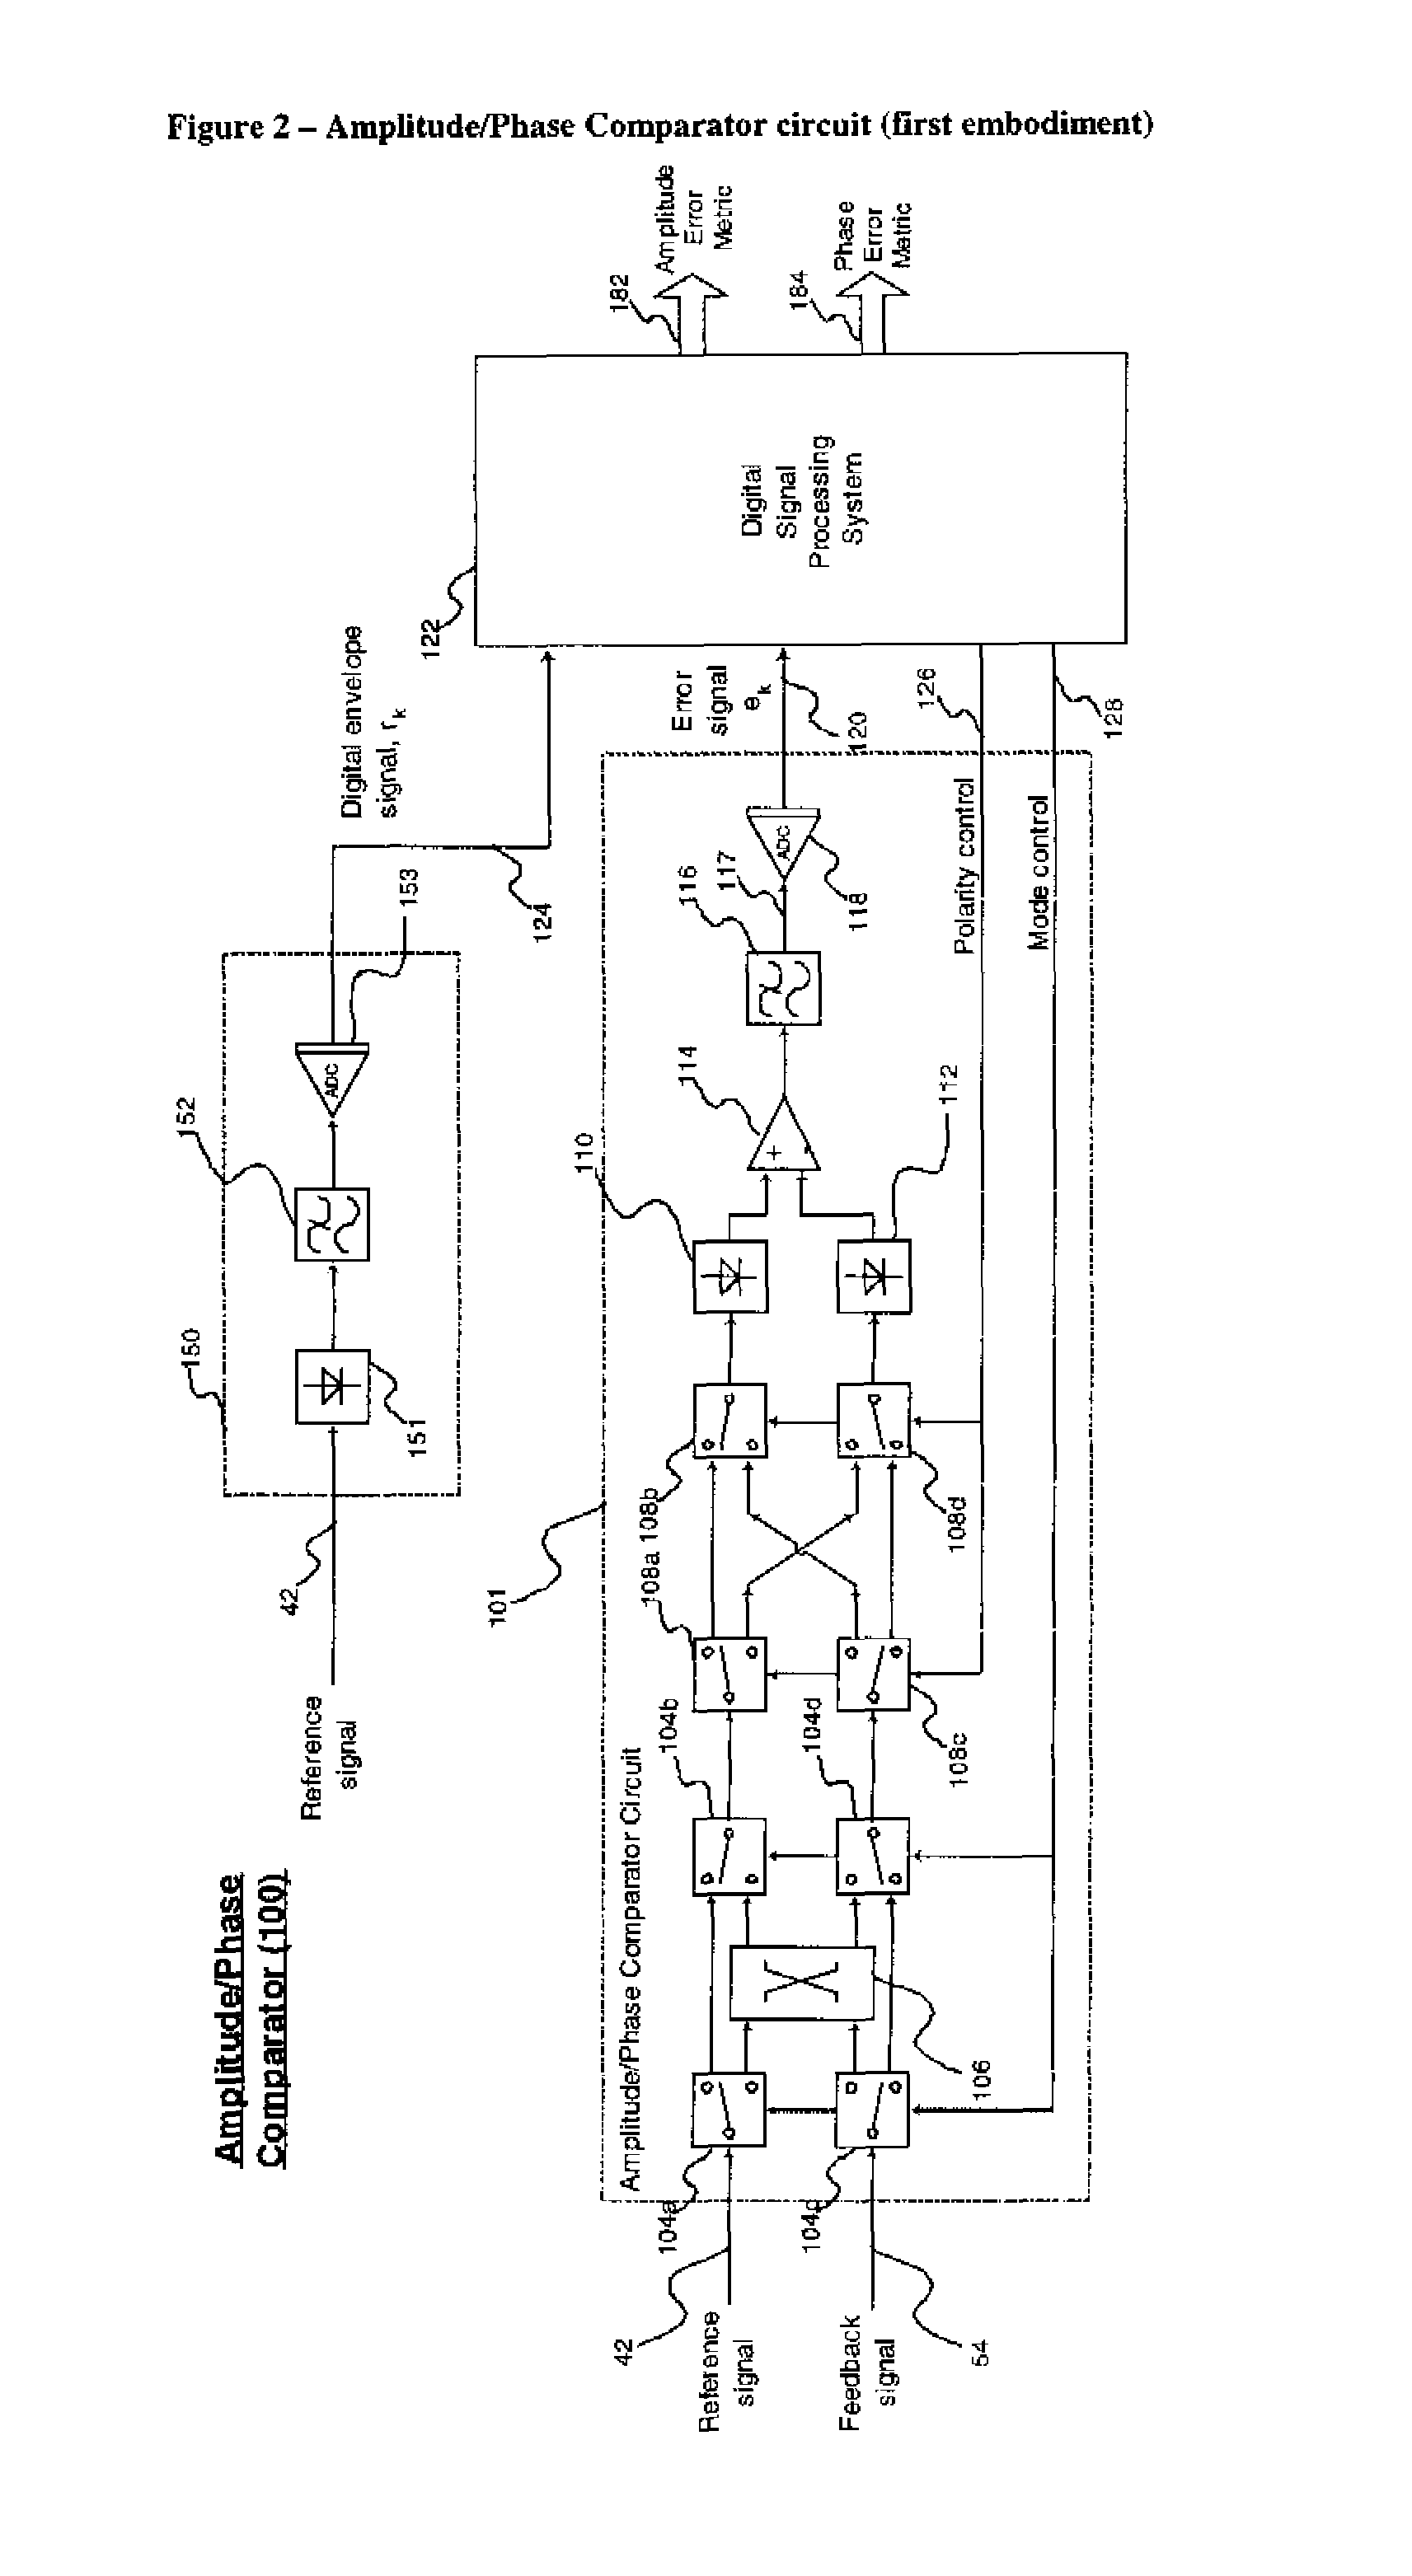 Amplitude and phase comparator for microwave power amplifier